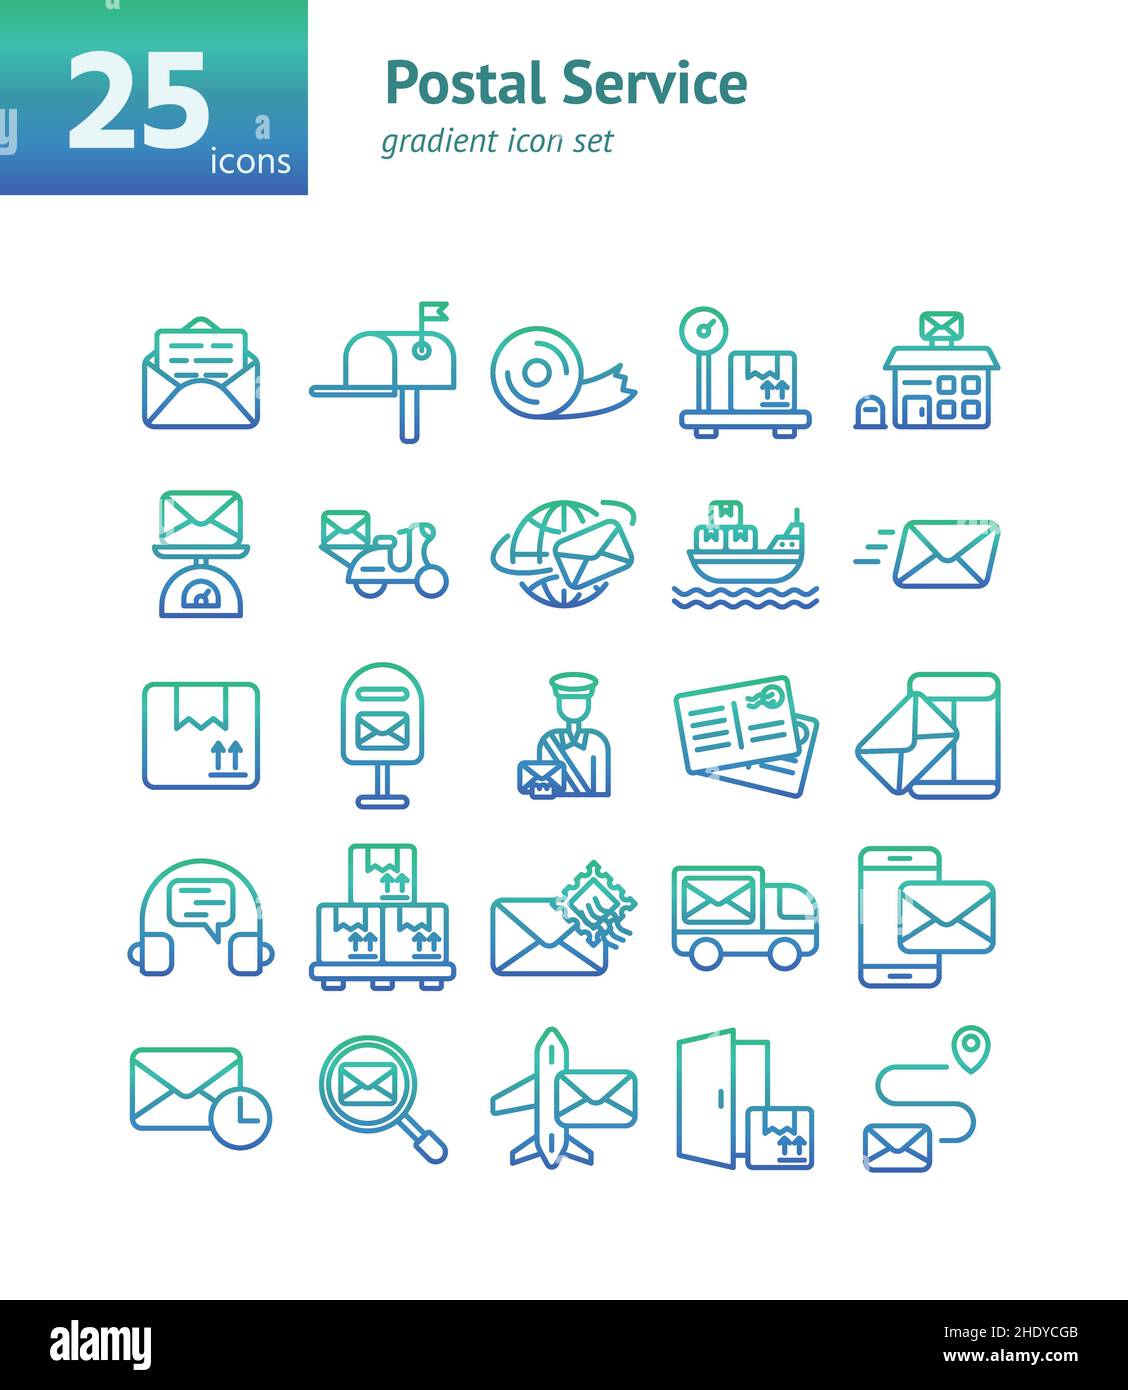 Postal Service gradient icon set. Vector and Illustration. Stock Vector